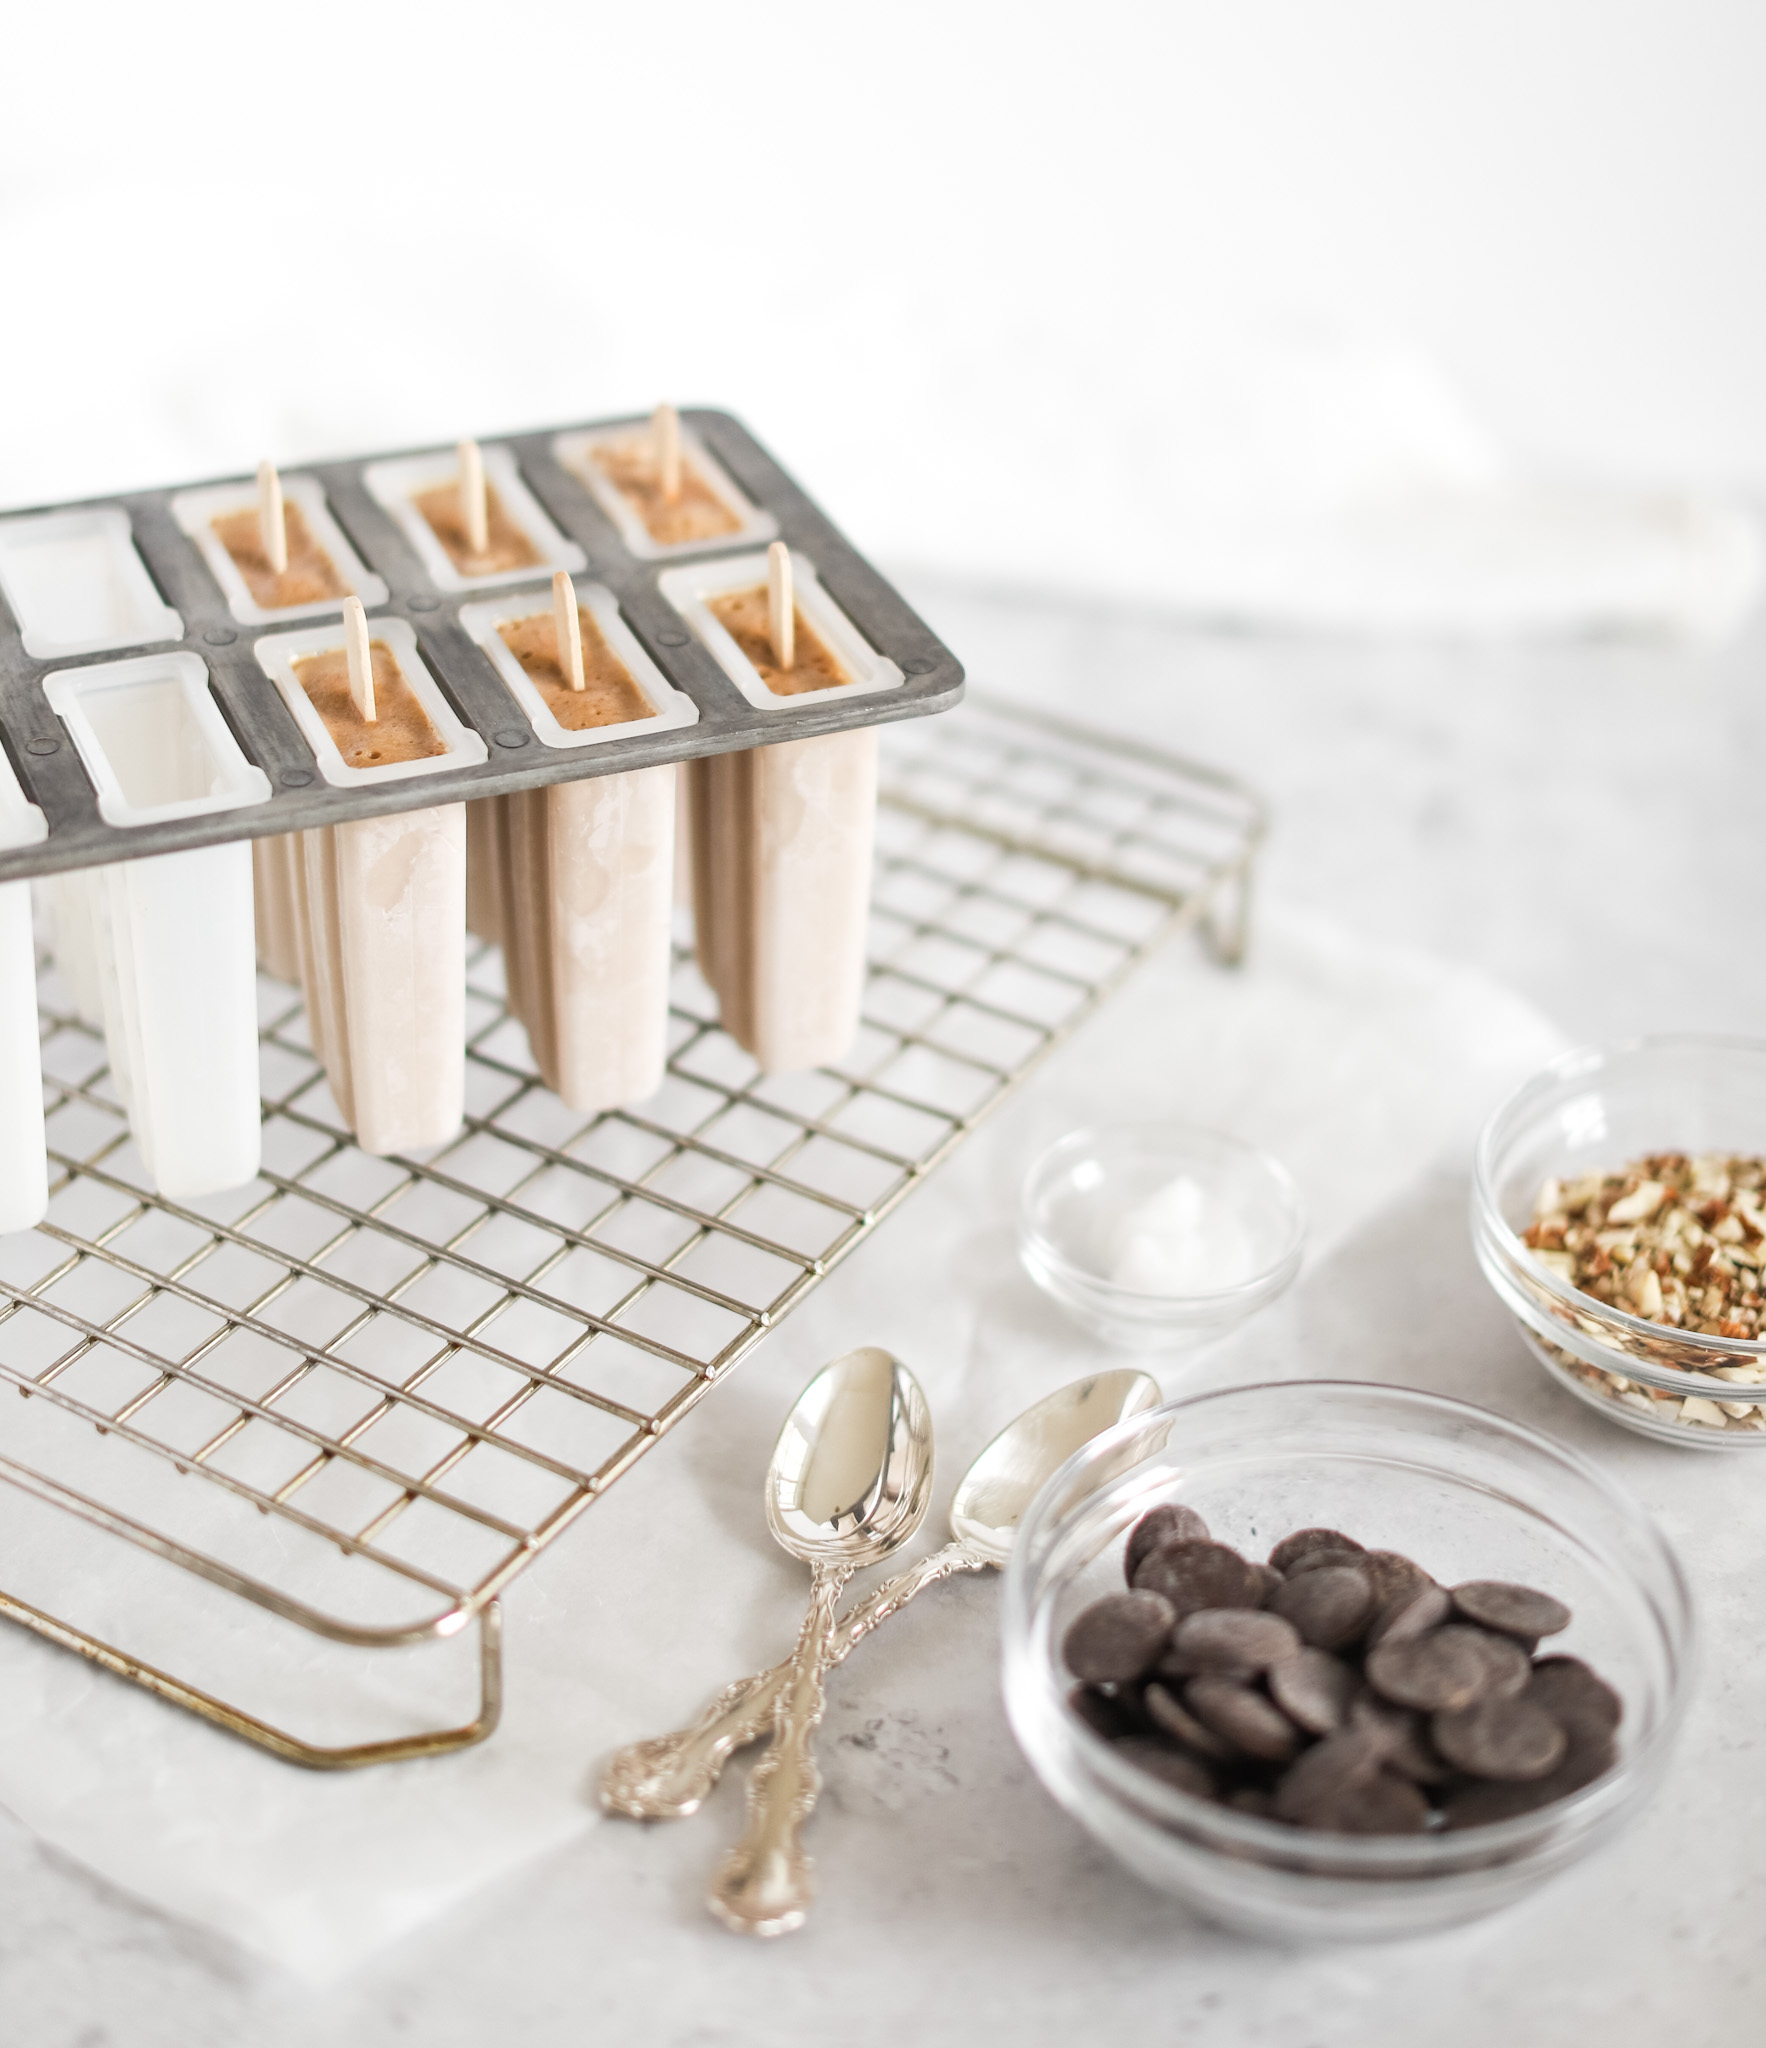 ingredients needed to make Almond Roca Popsicles like popsicle mould, chocolate, crushed almonds.